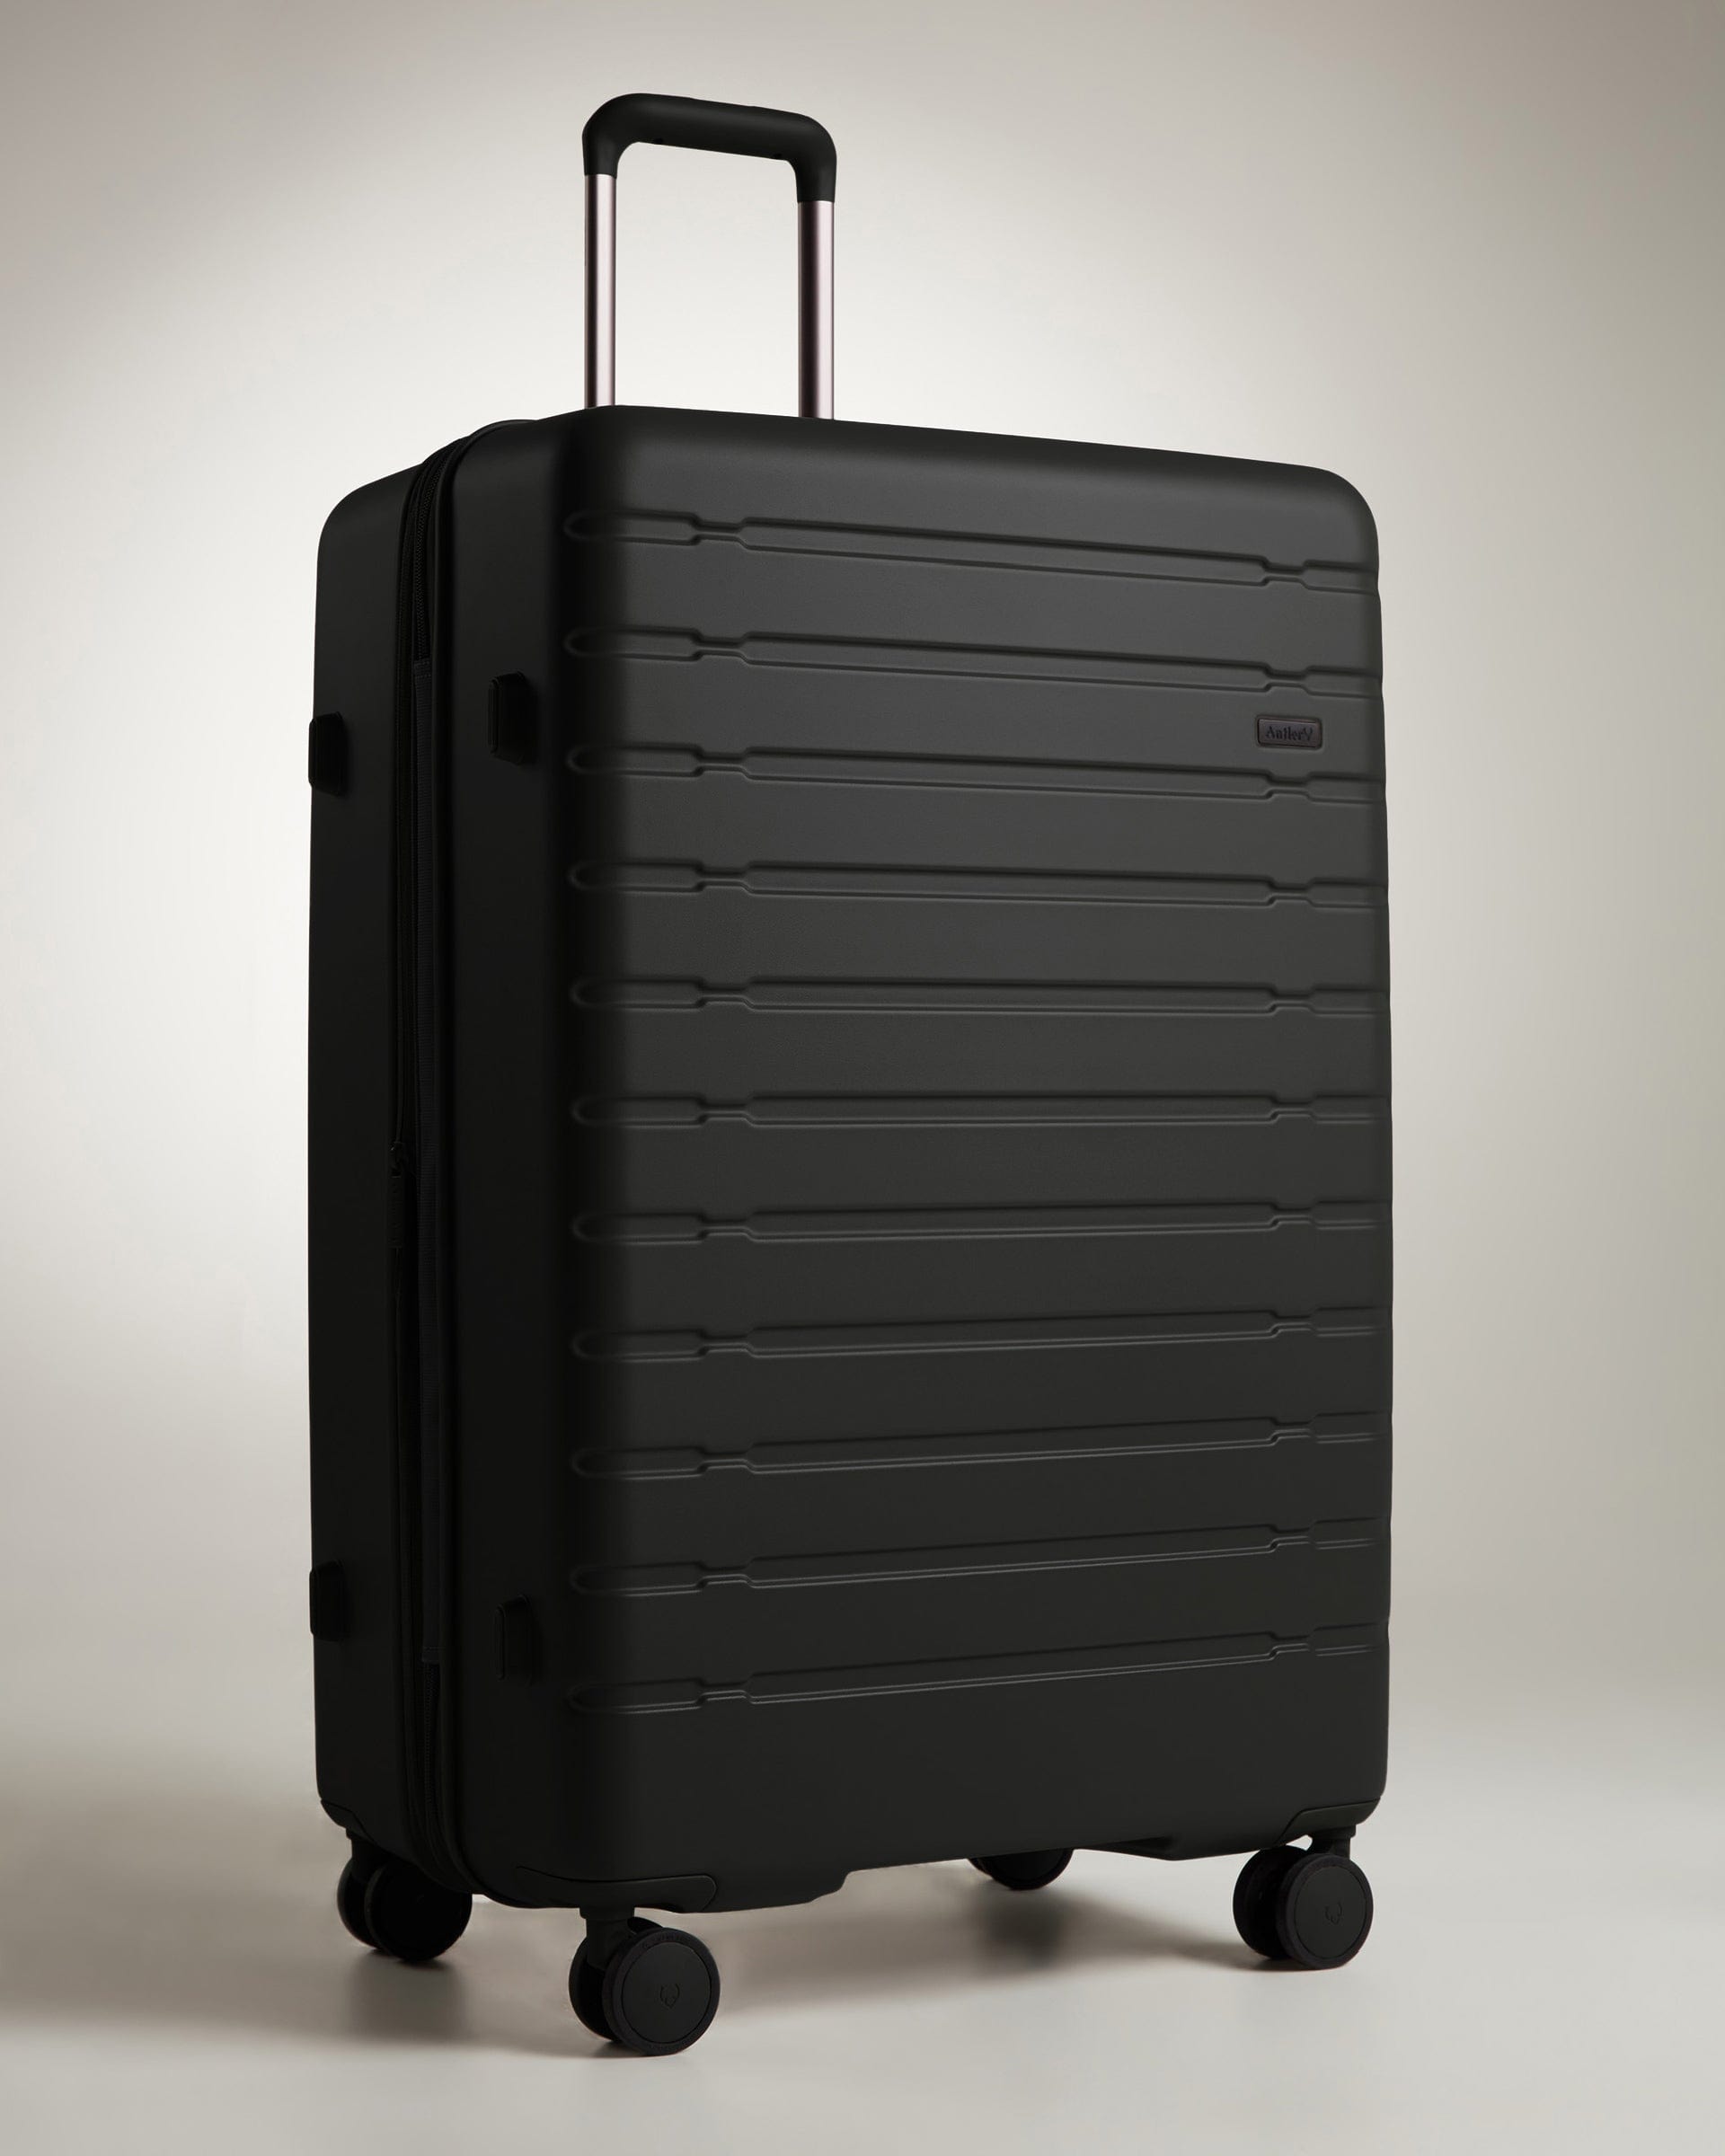 View Antler Stamford Large Suitcase In Black Size 815 x 54 x 345 cm information